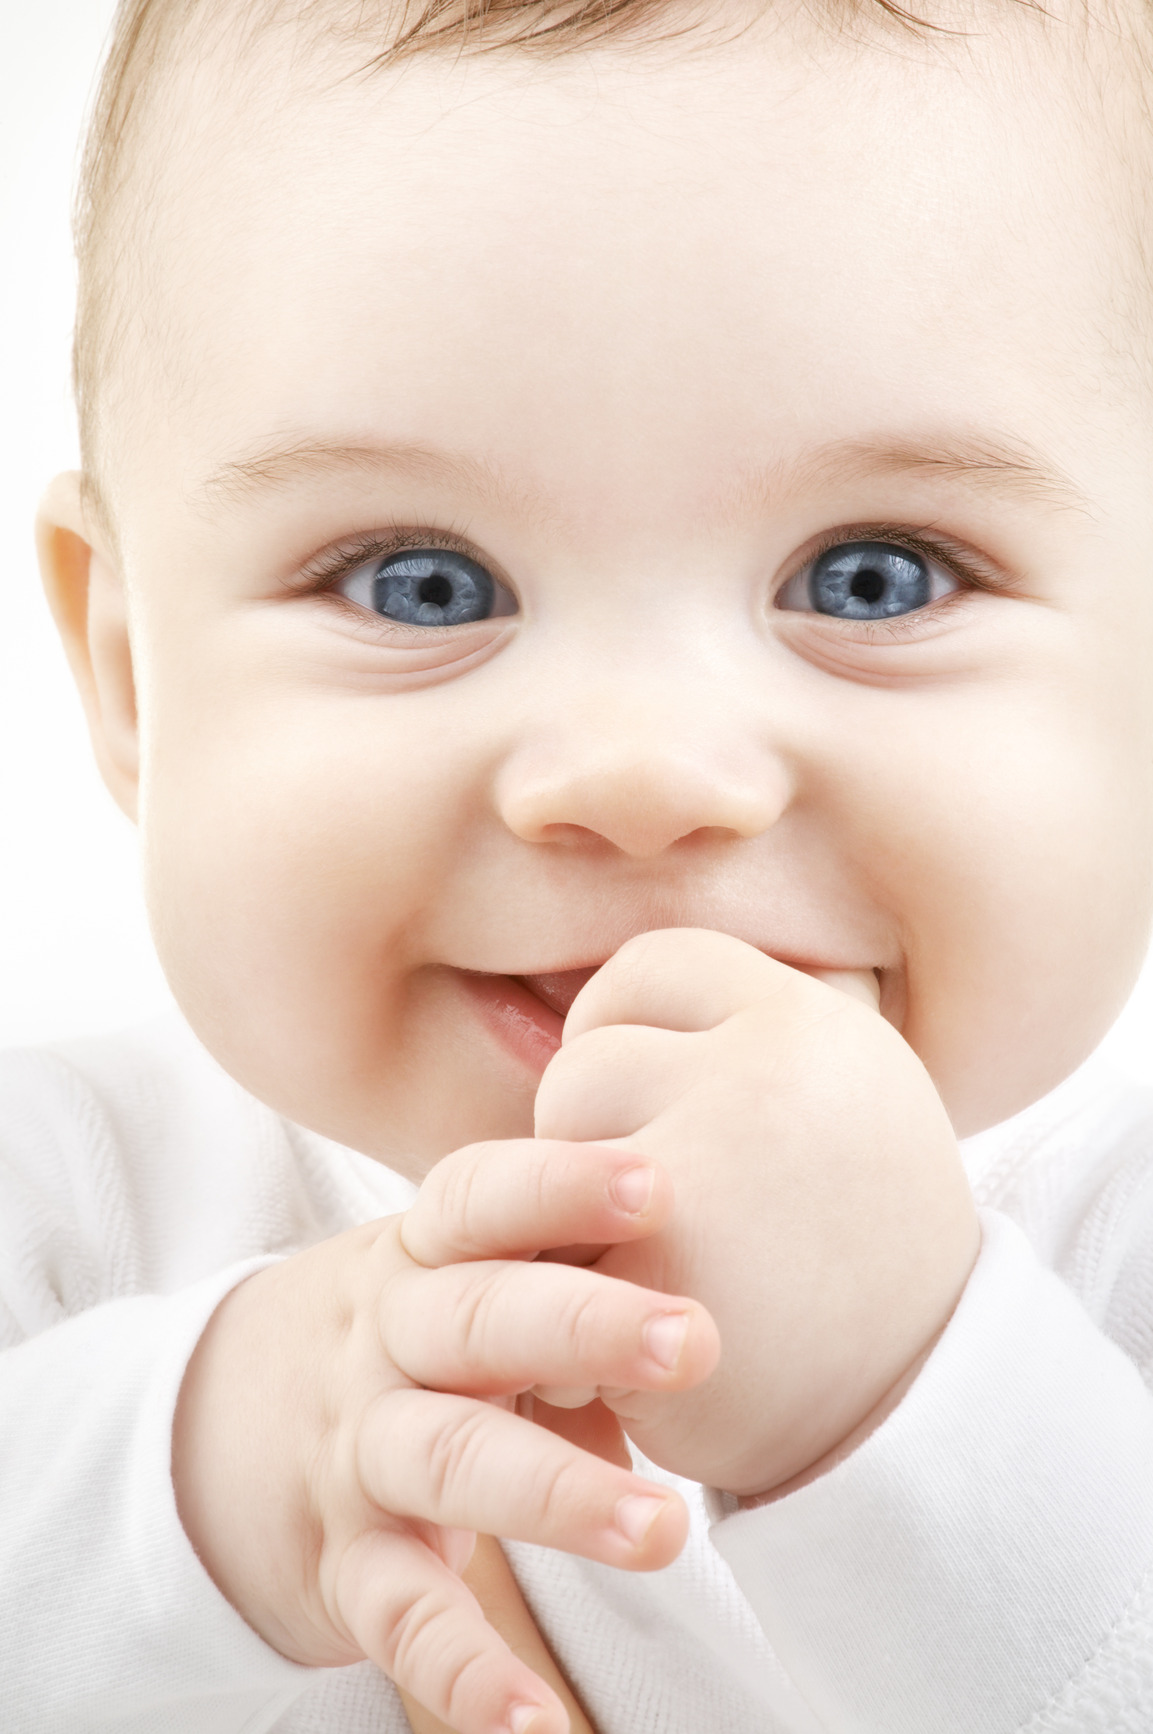 Portraits Of Children Wallpaper For Mobile - Cute Baby Boy Smiling , HD Wallpaper & Backgrounds